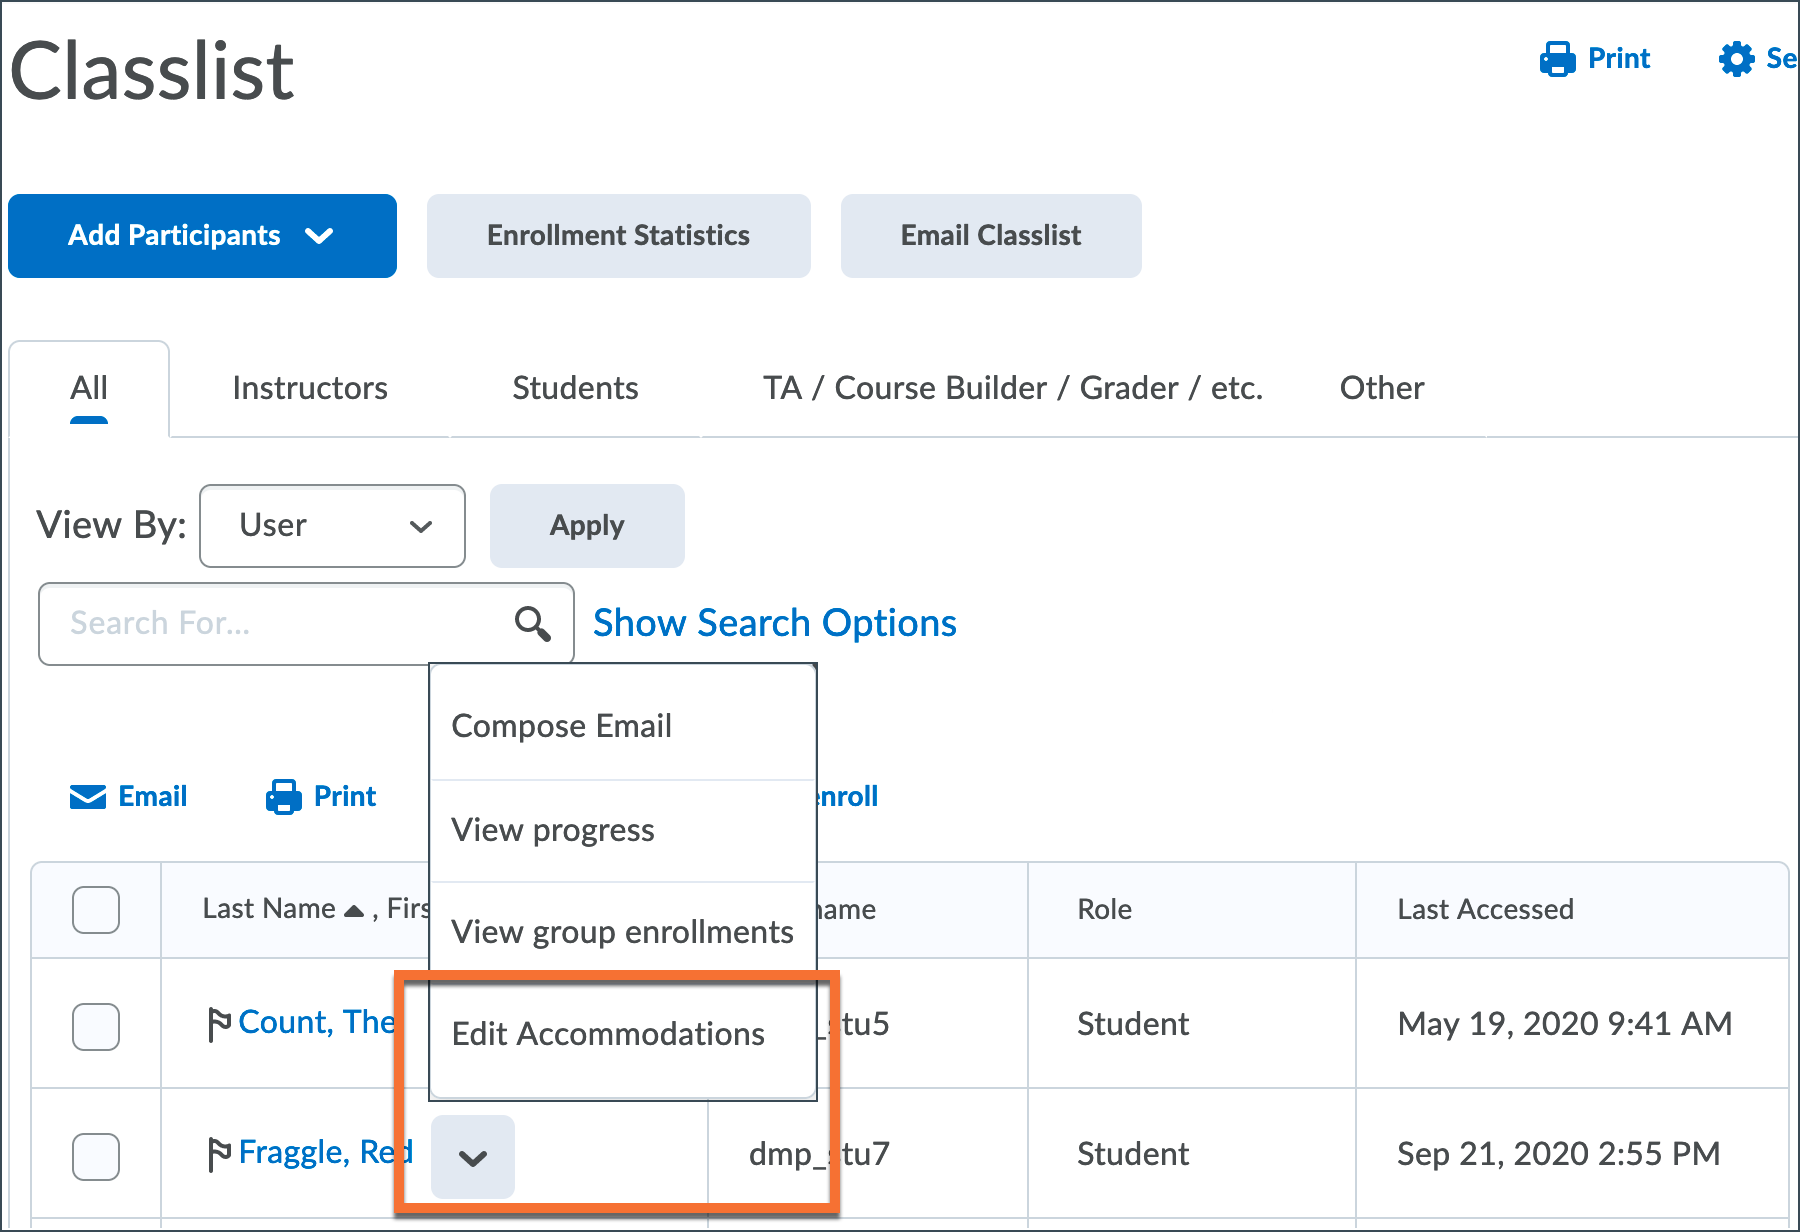 Locate the Edit Accommodations button for a student in the Classlist